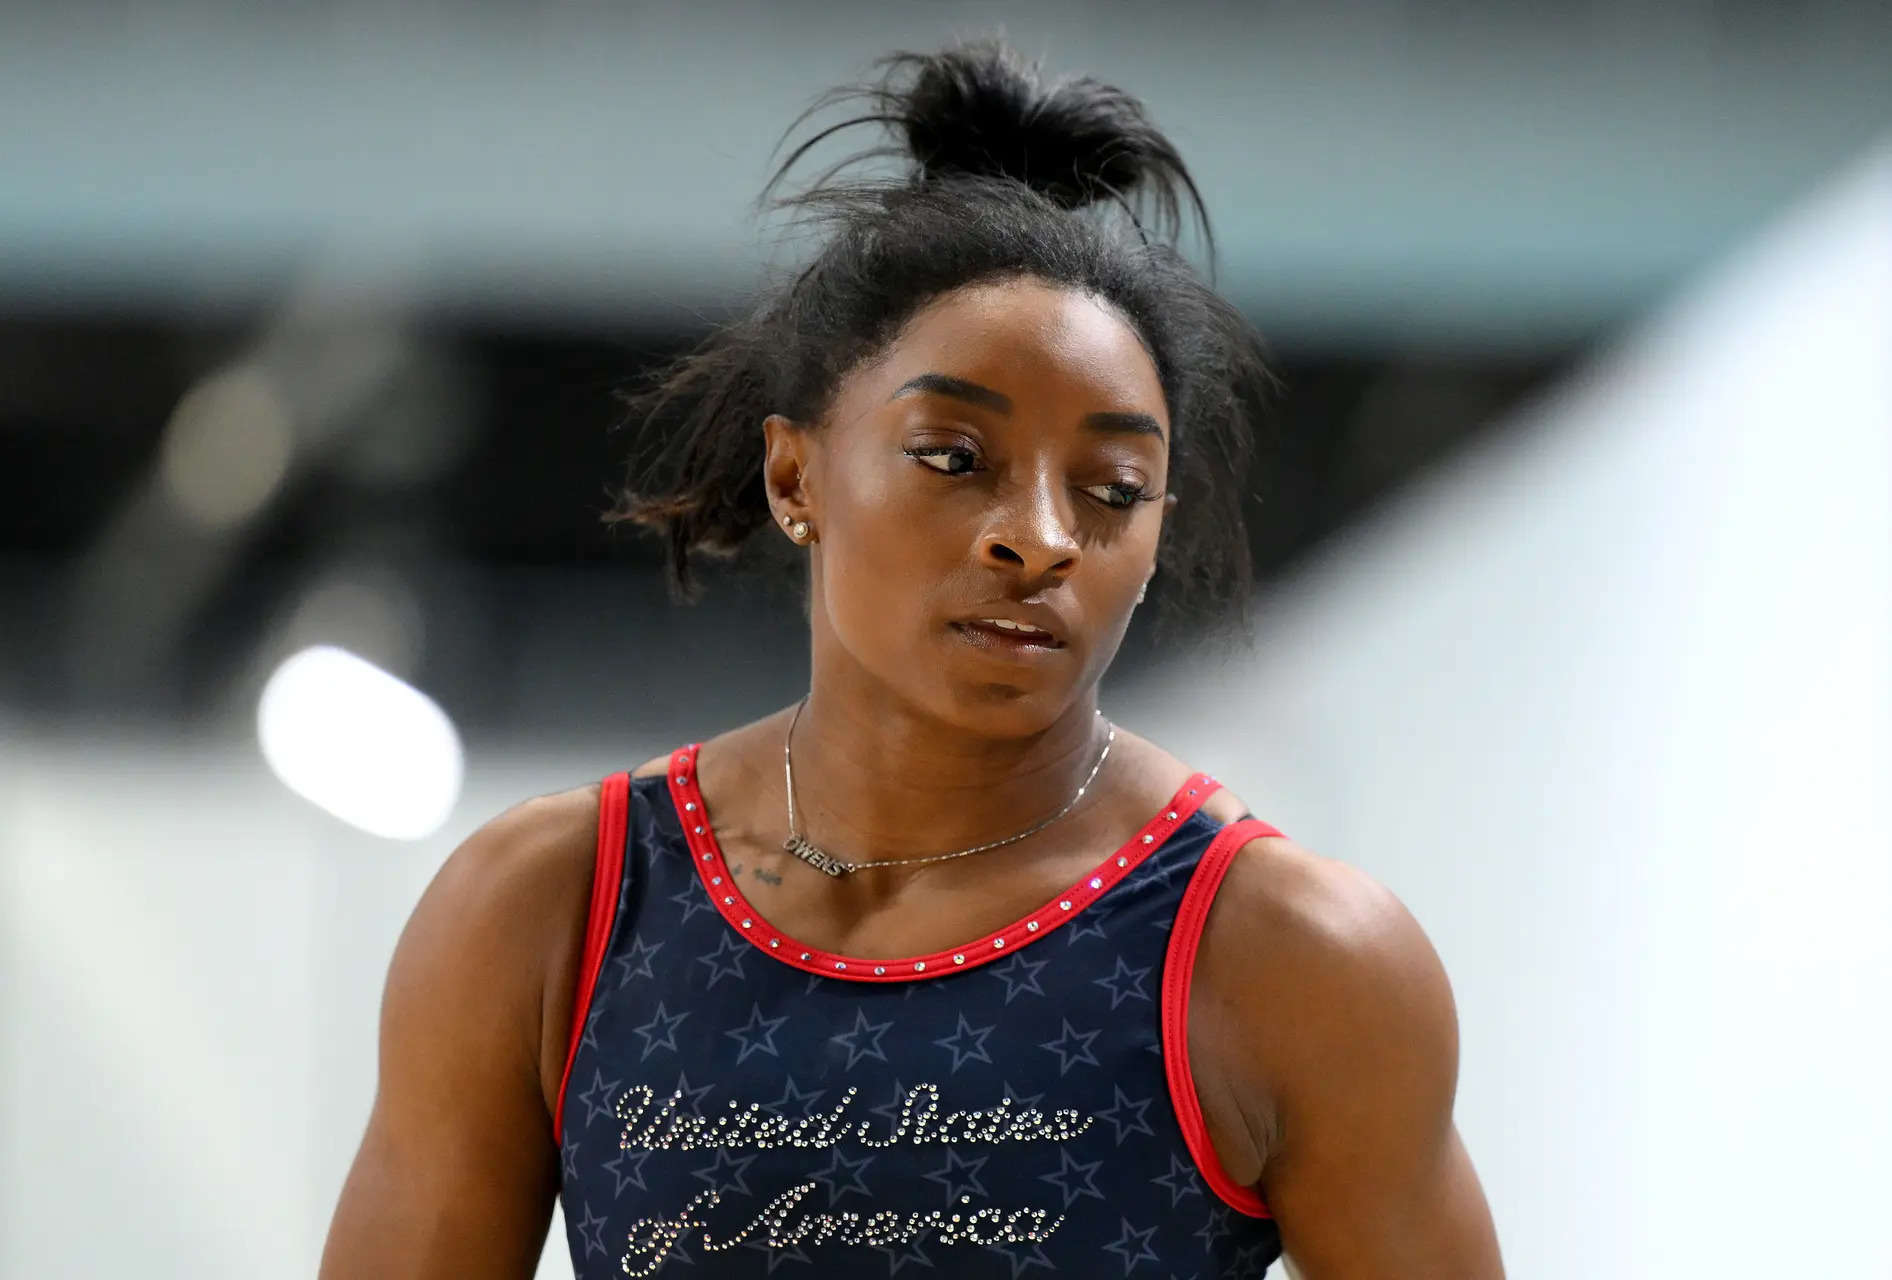 Team USA's Simone Biles gears up for Paris Olympics: Details, timings, how to watch in US 